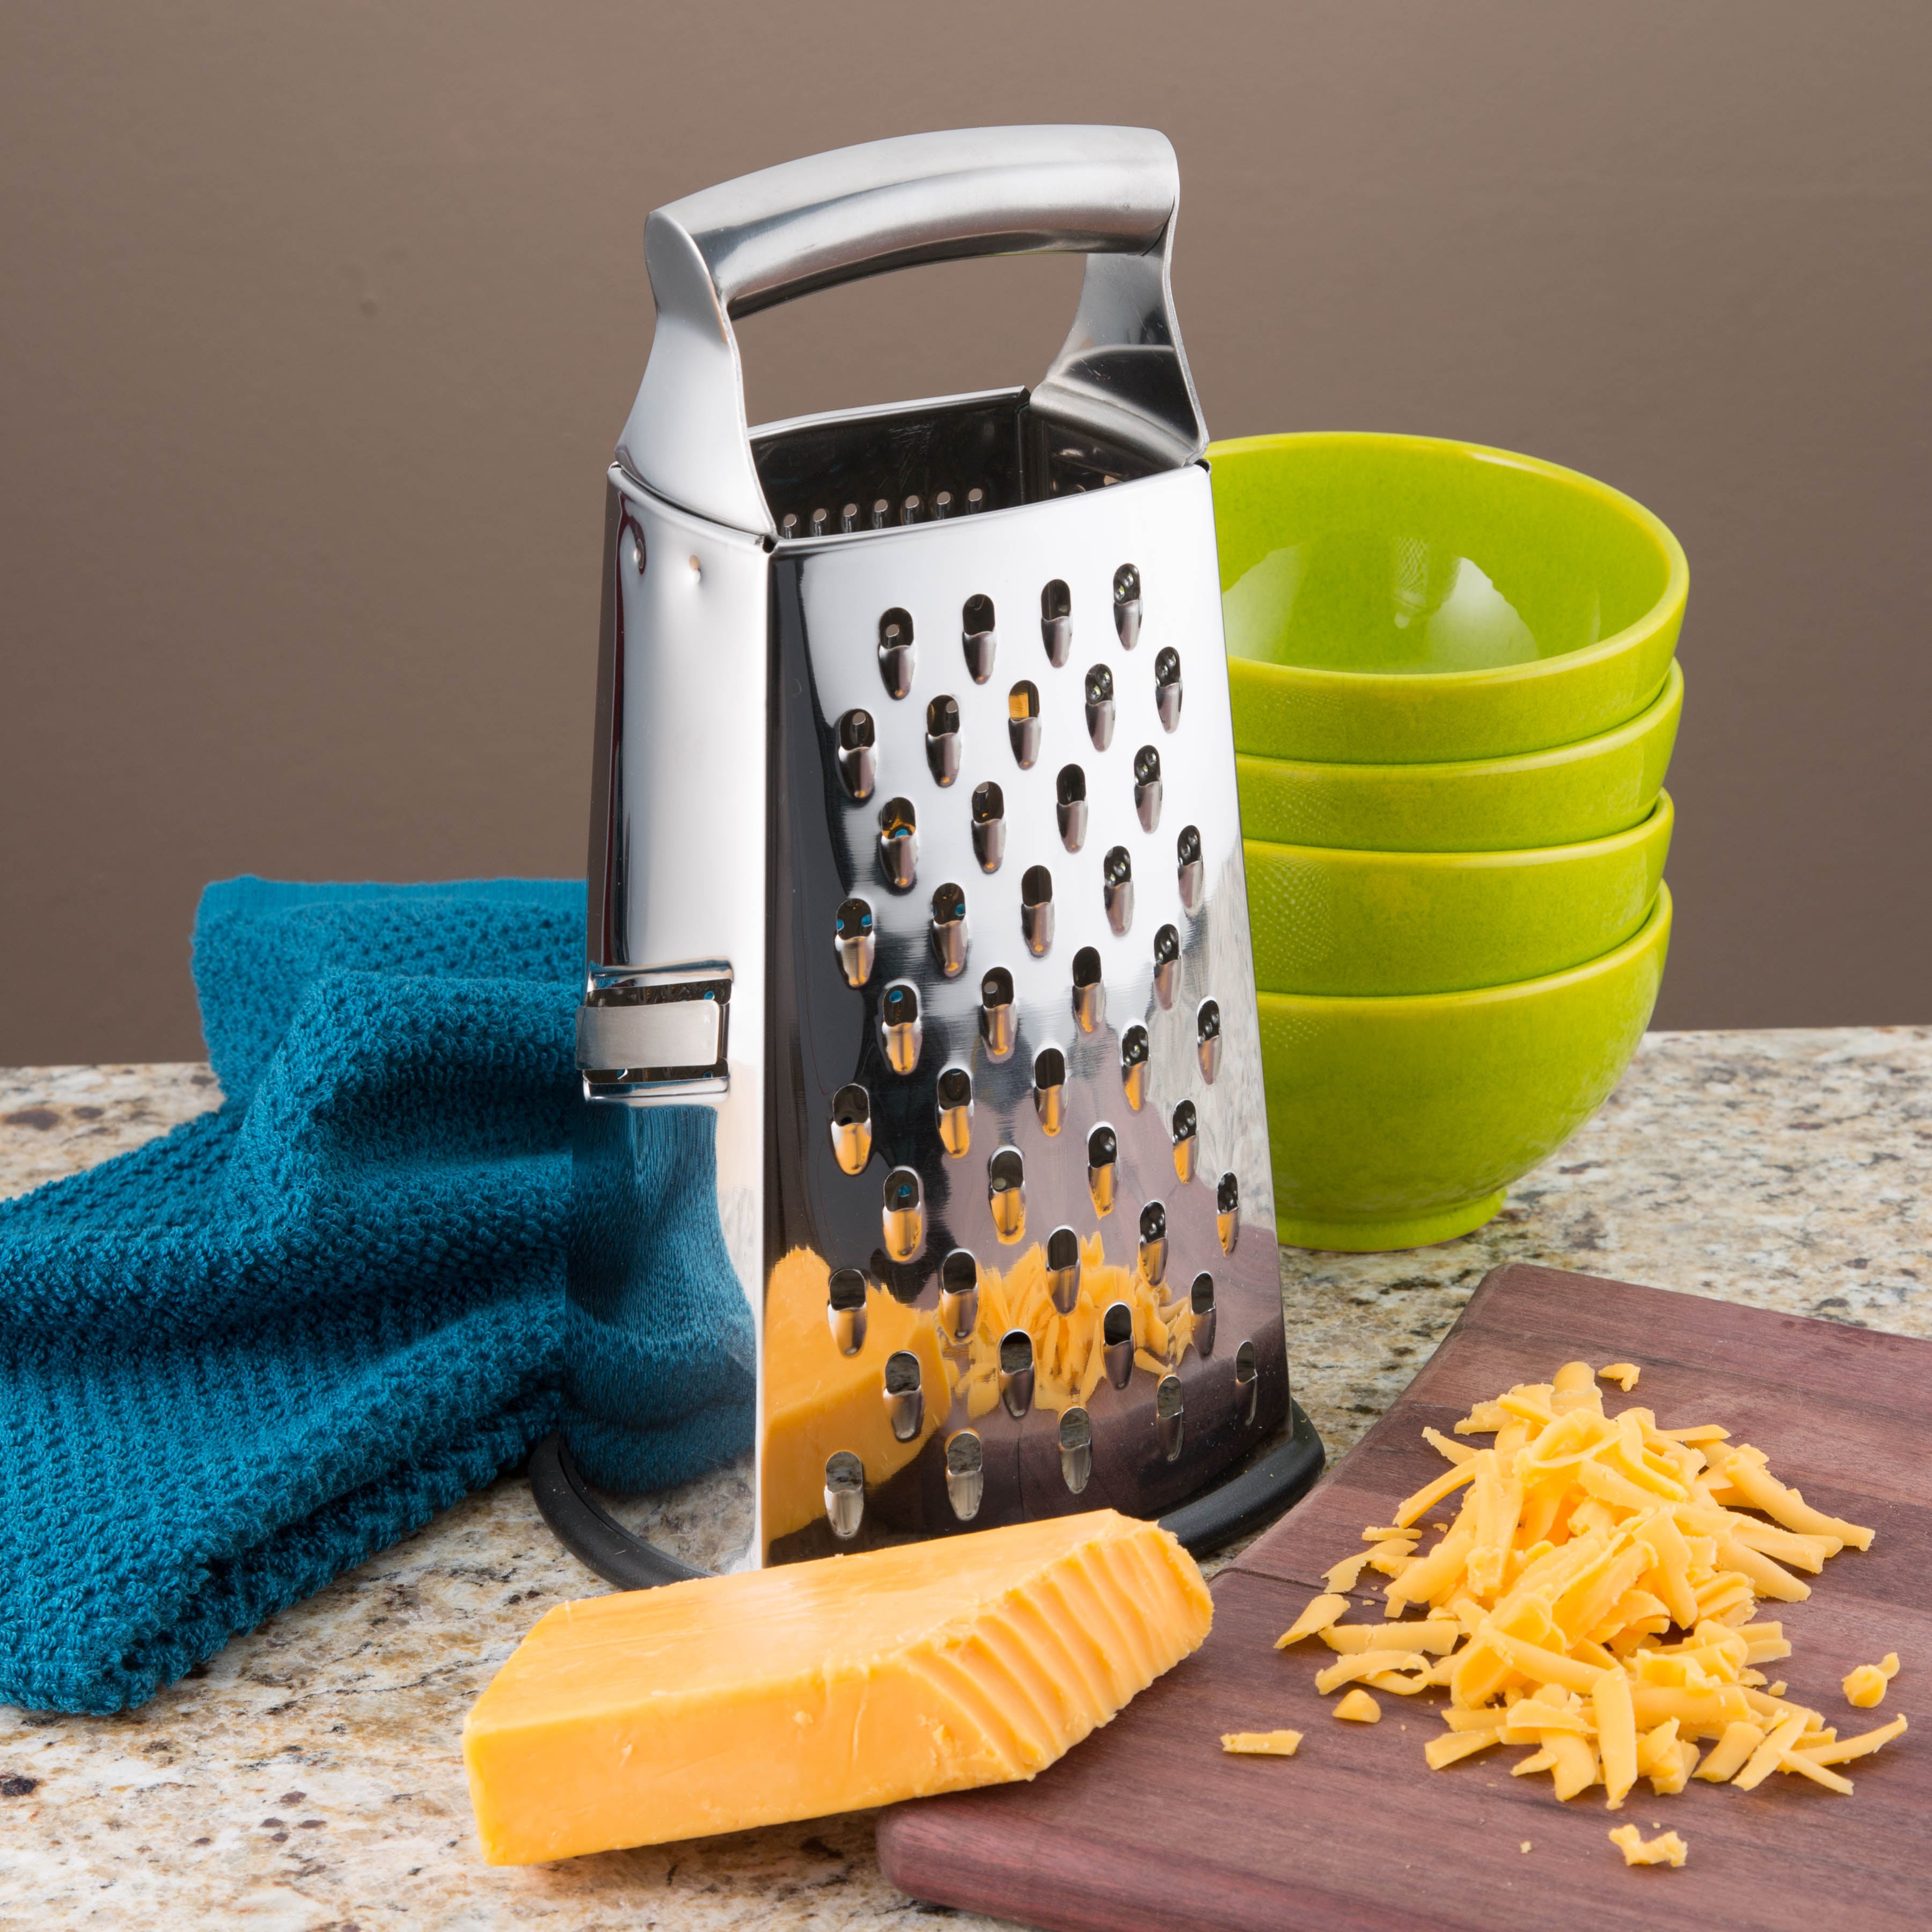 Spring Chef Professional Cheese Grater With Storage Container, Stainless  Steel & Soft Grip Handle, 4 Sides, Handheld Kitchen Food Shredder Best Box